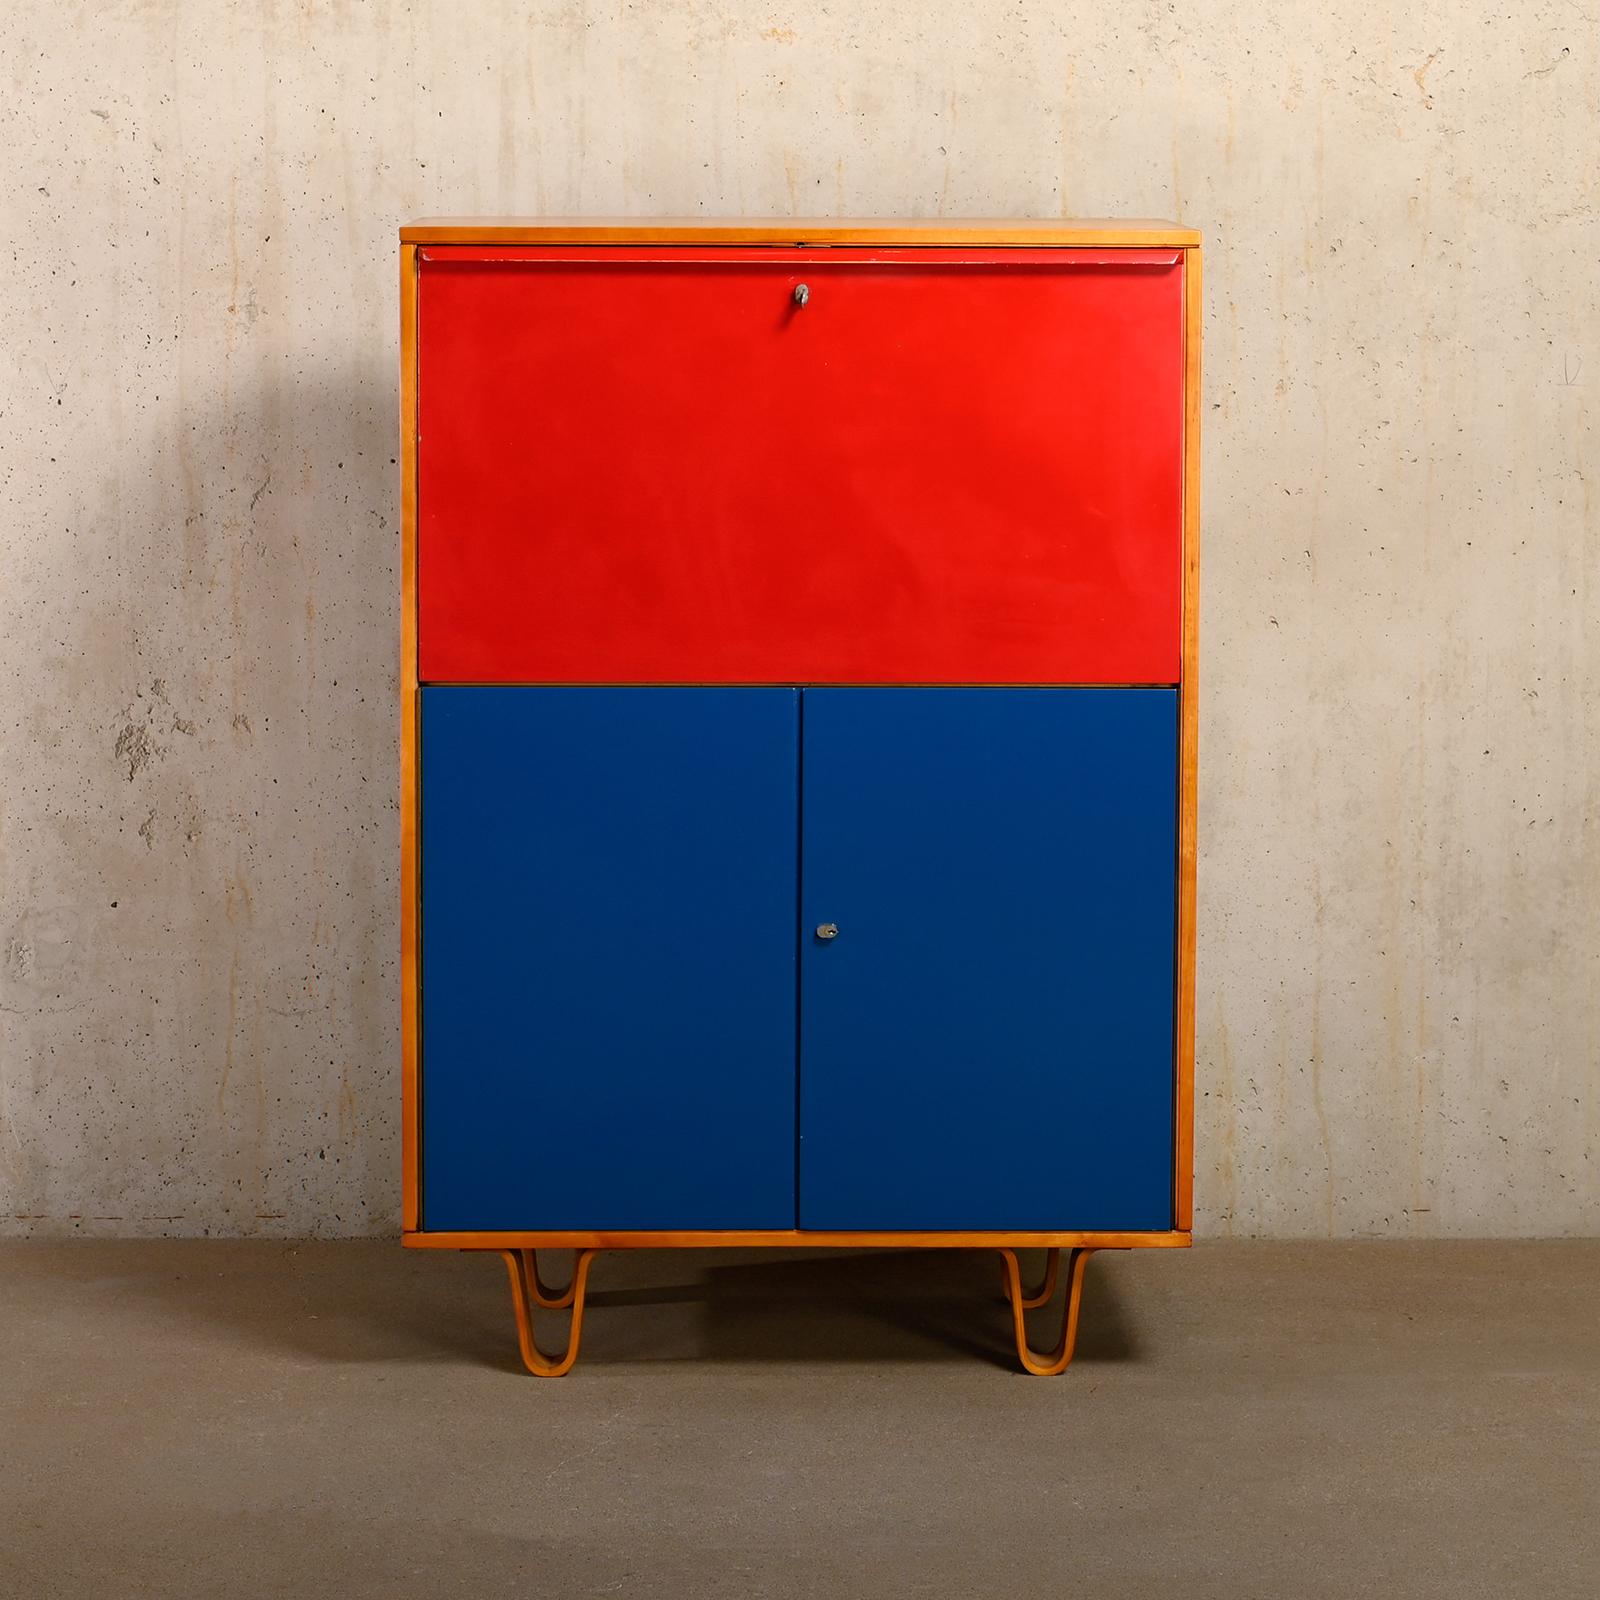 Stylish Secretaire Model CB07 designed by Cees Braakman and manufactured by Pastoe in the 1950s, the Netherlands. This Secretaire was part of the 'Birch Series' of Pastoe and inspired by the new molded plywood technics that came available in the mid